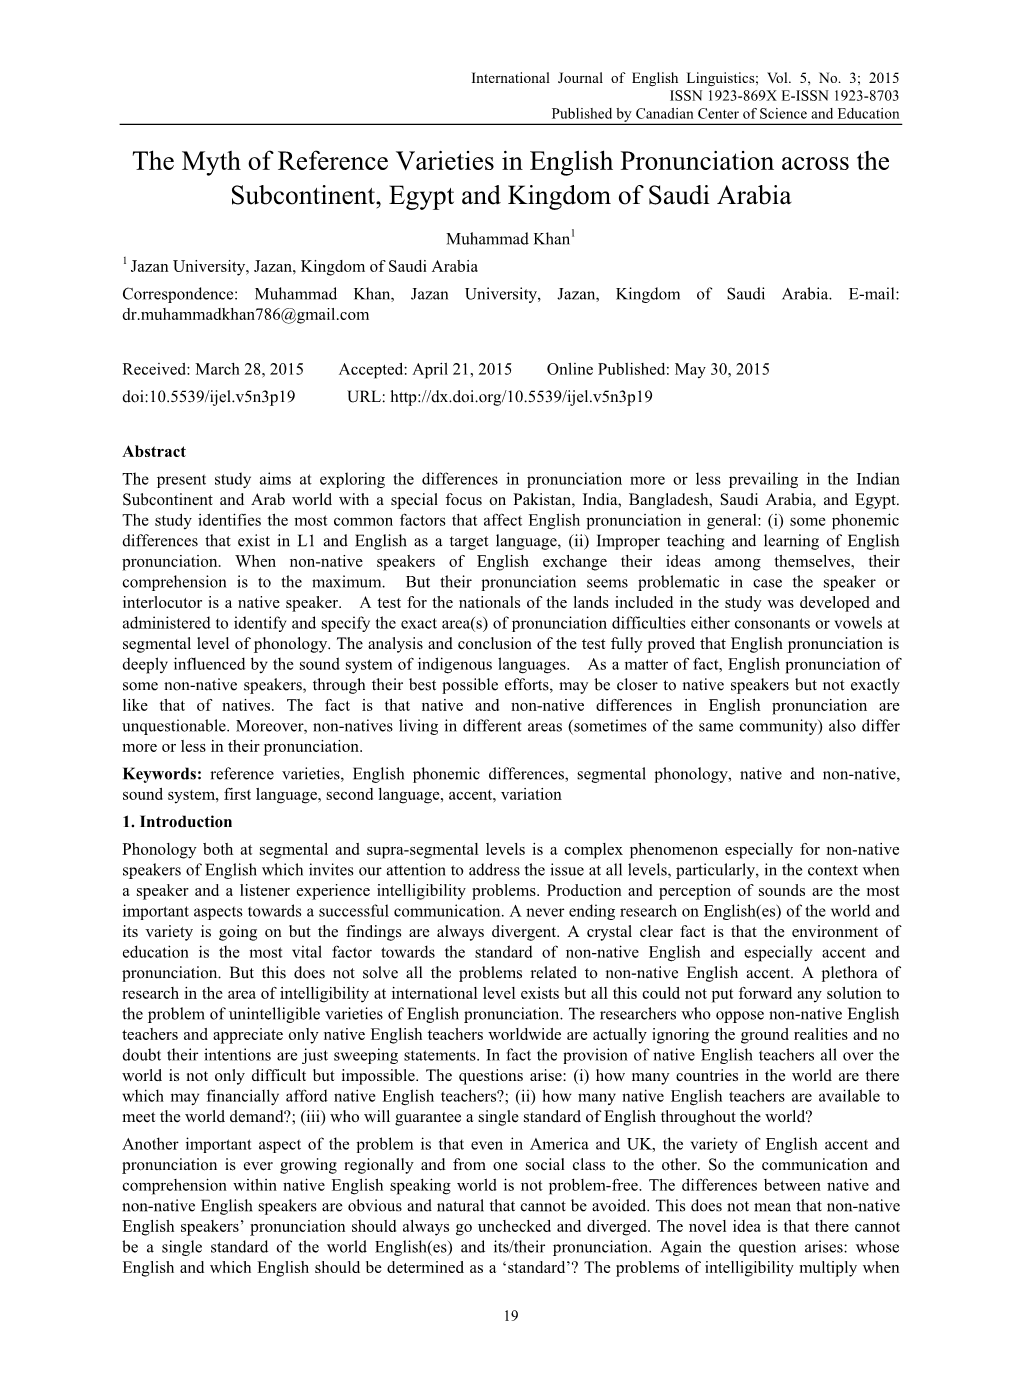 The Myth of Reference Varieties in English Pronunciation Across the Subcontinent, Egypt and Kingdom of Saudi Arabia